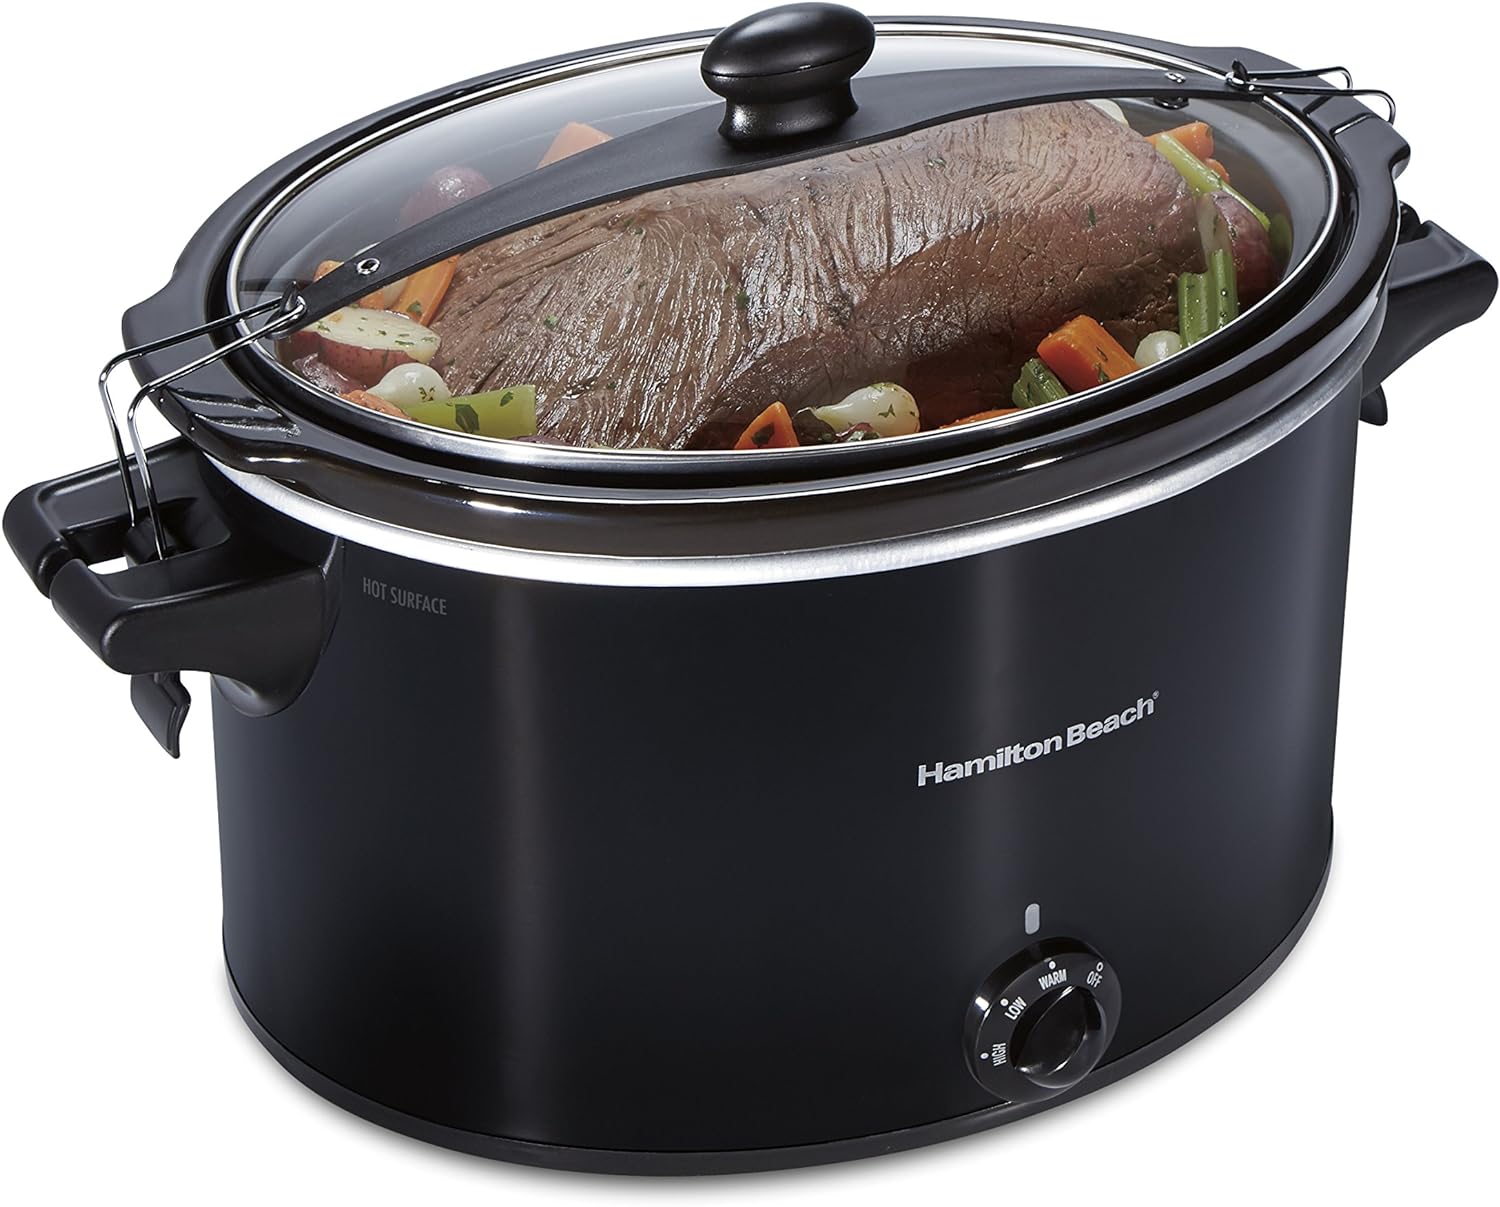 Hamilton Beach Slow Cooker, Extra Large 10 Quart, Stay or Go Portable, Black (33195)  4-Quart Slow Cooker with Dishwasher-Safe Stoneware Crock  Lid, Stainless Steel (33140V)